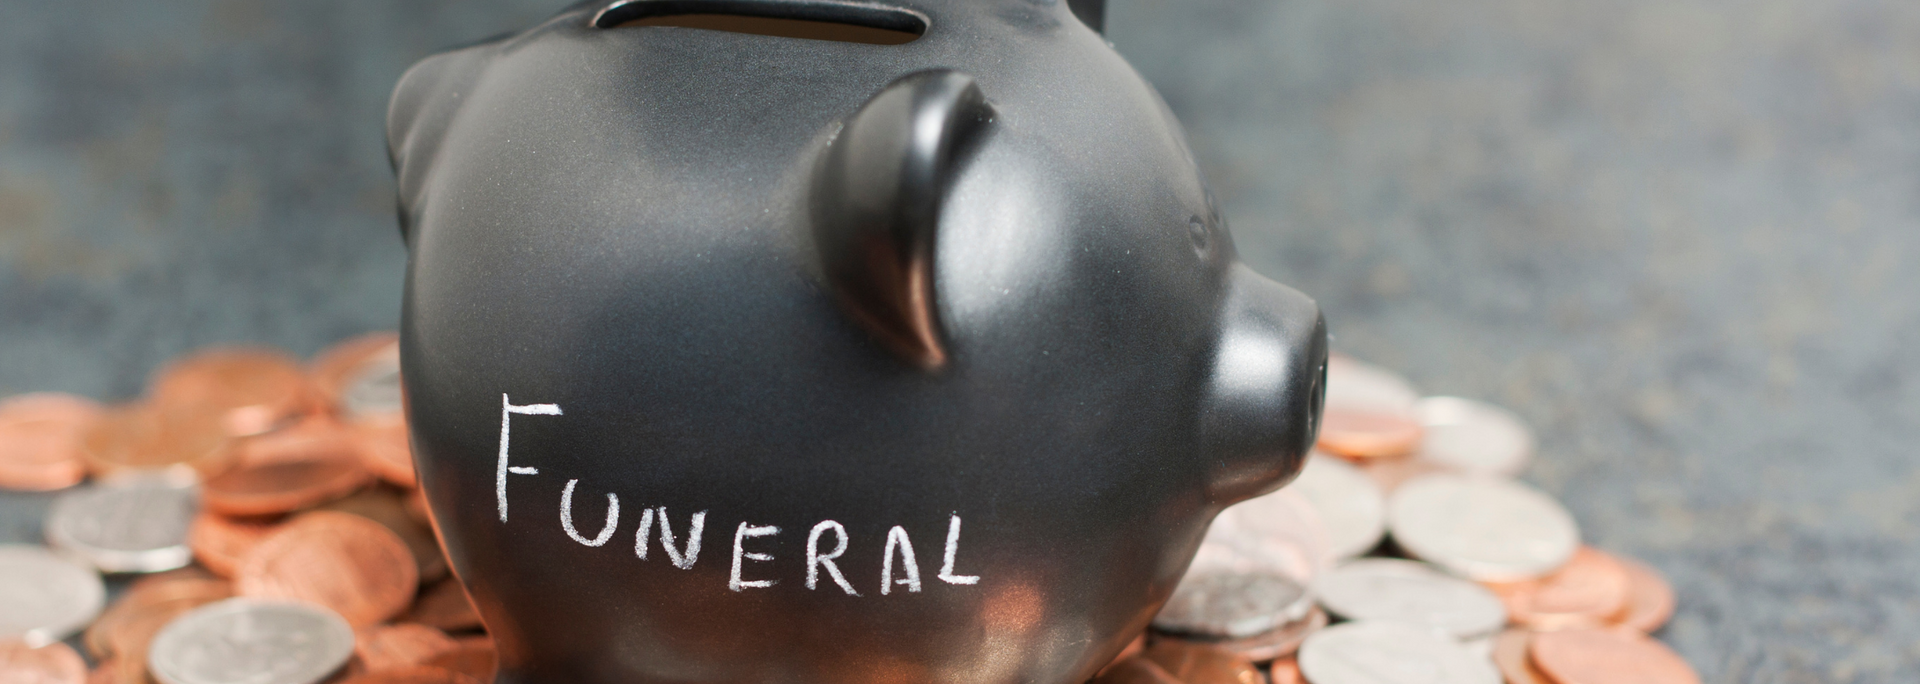 Picture of a piggy bank with funeral written on it